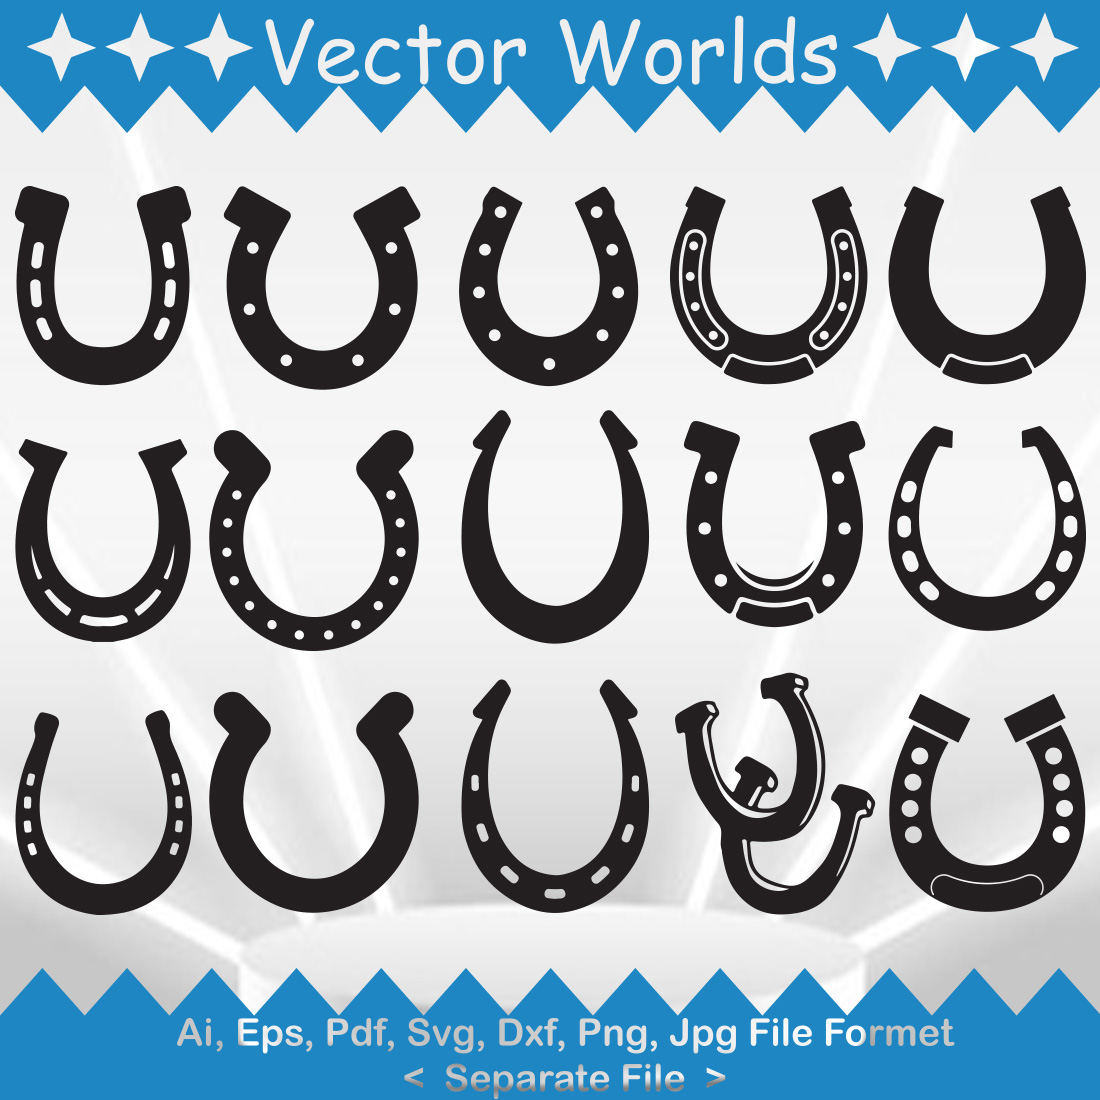 Set of black and white horseshoes and stars.